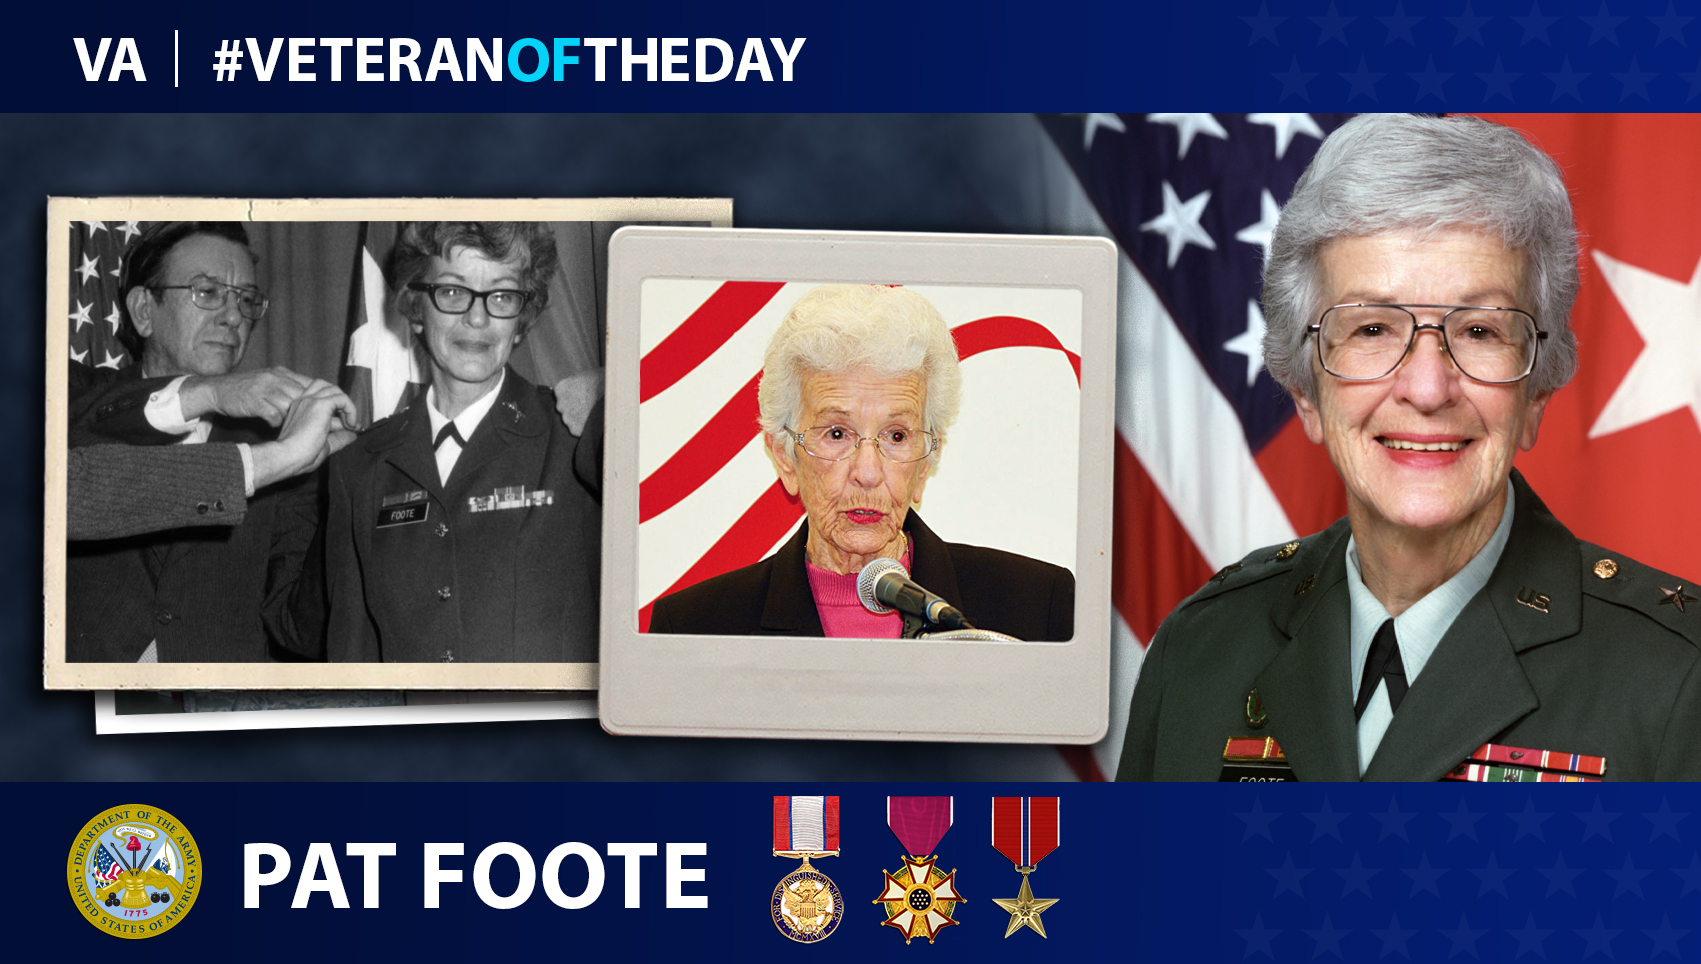 Army Veteran Pat Foote is today's Veteran of the Day.